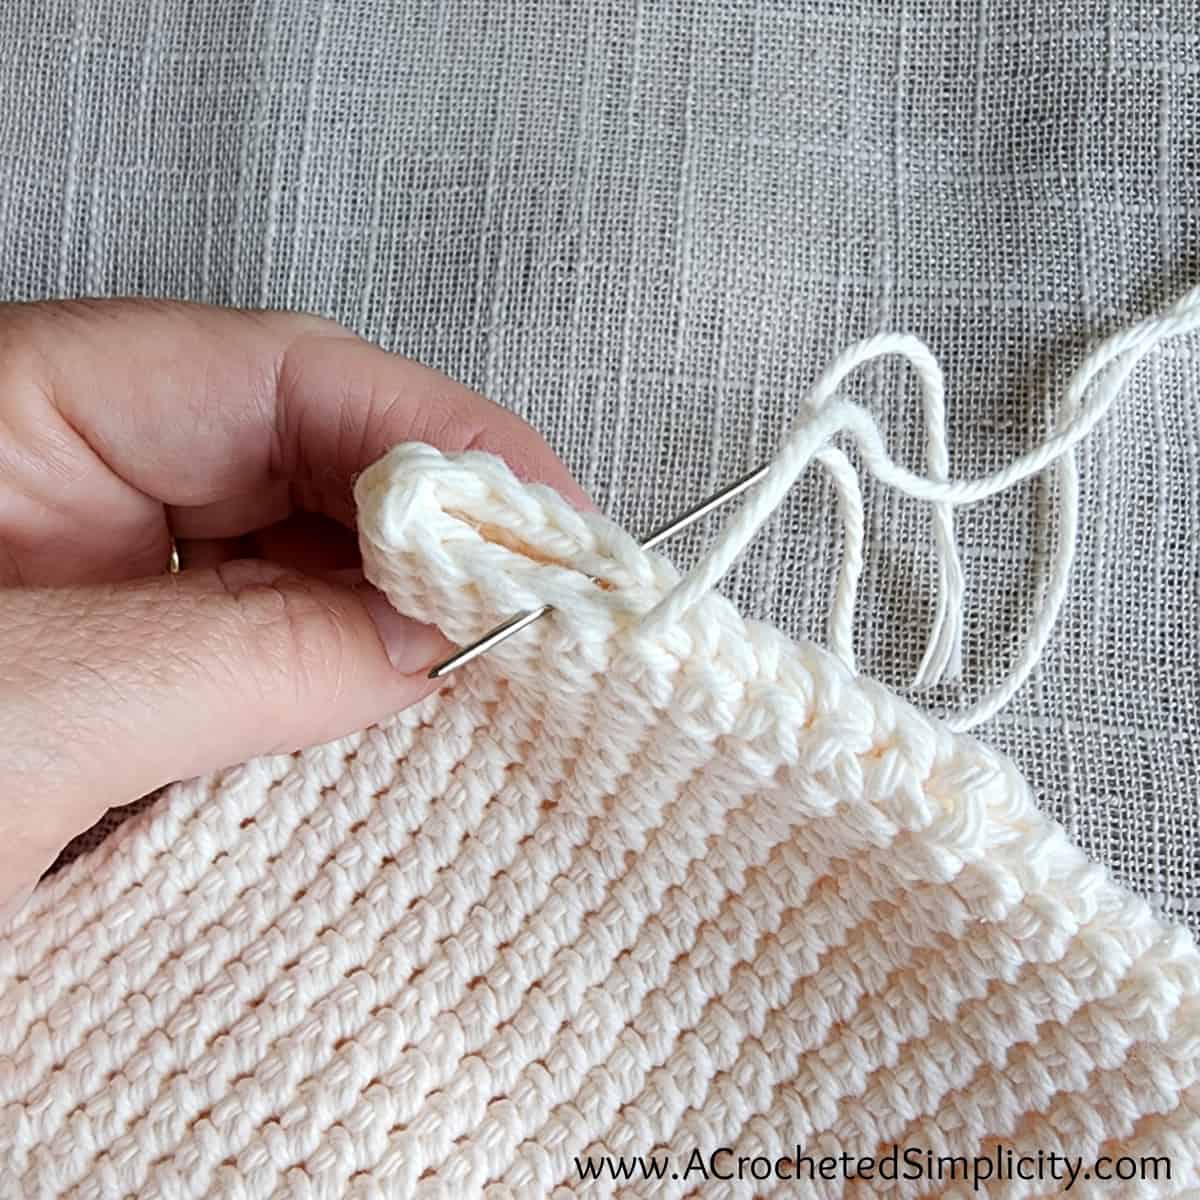 The bottom of a small crochet pouch being sewn shut with a whipstitch.